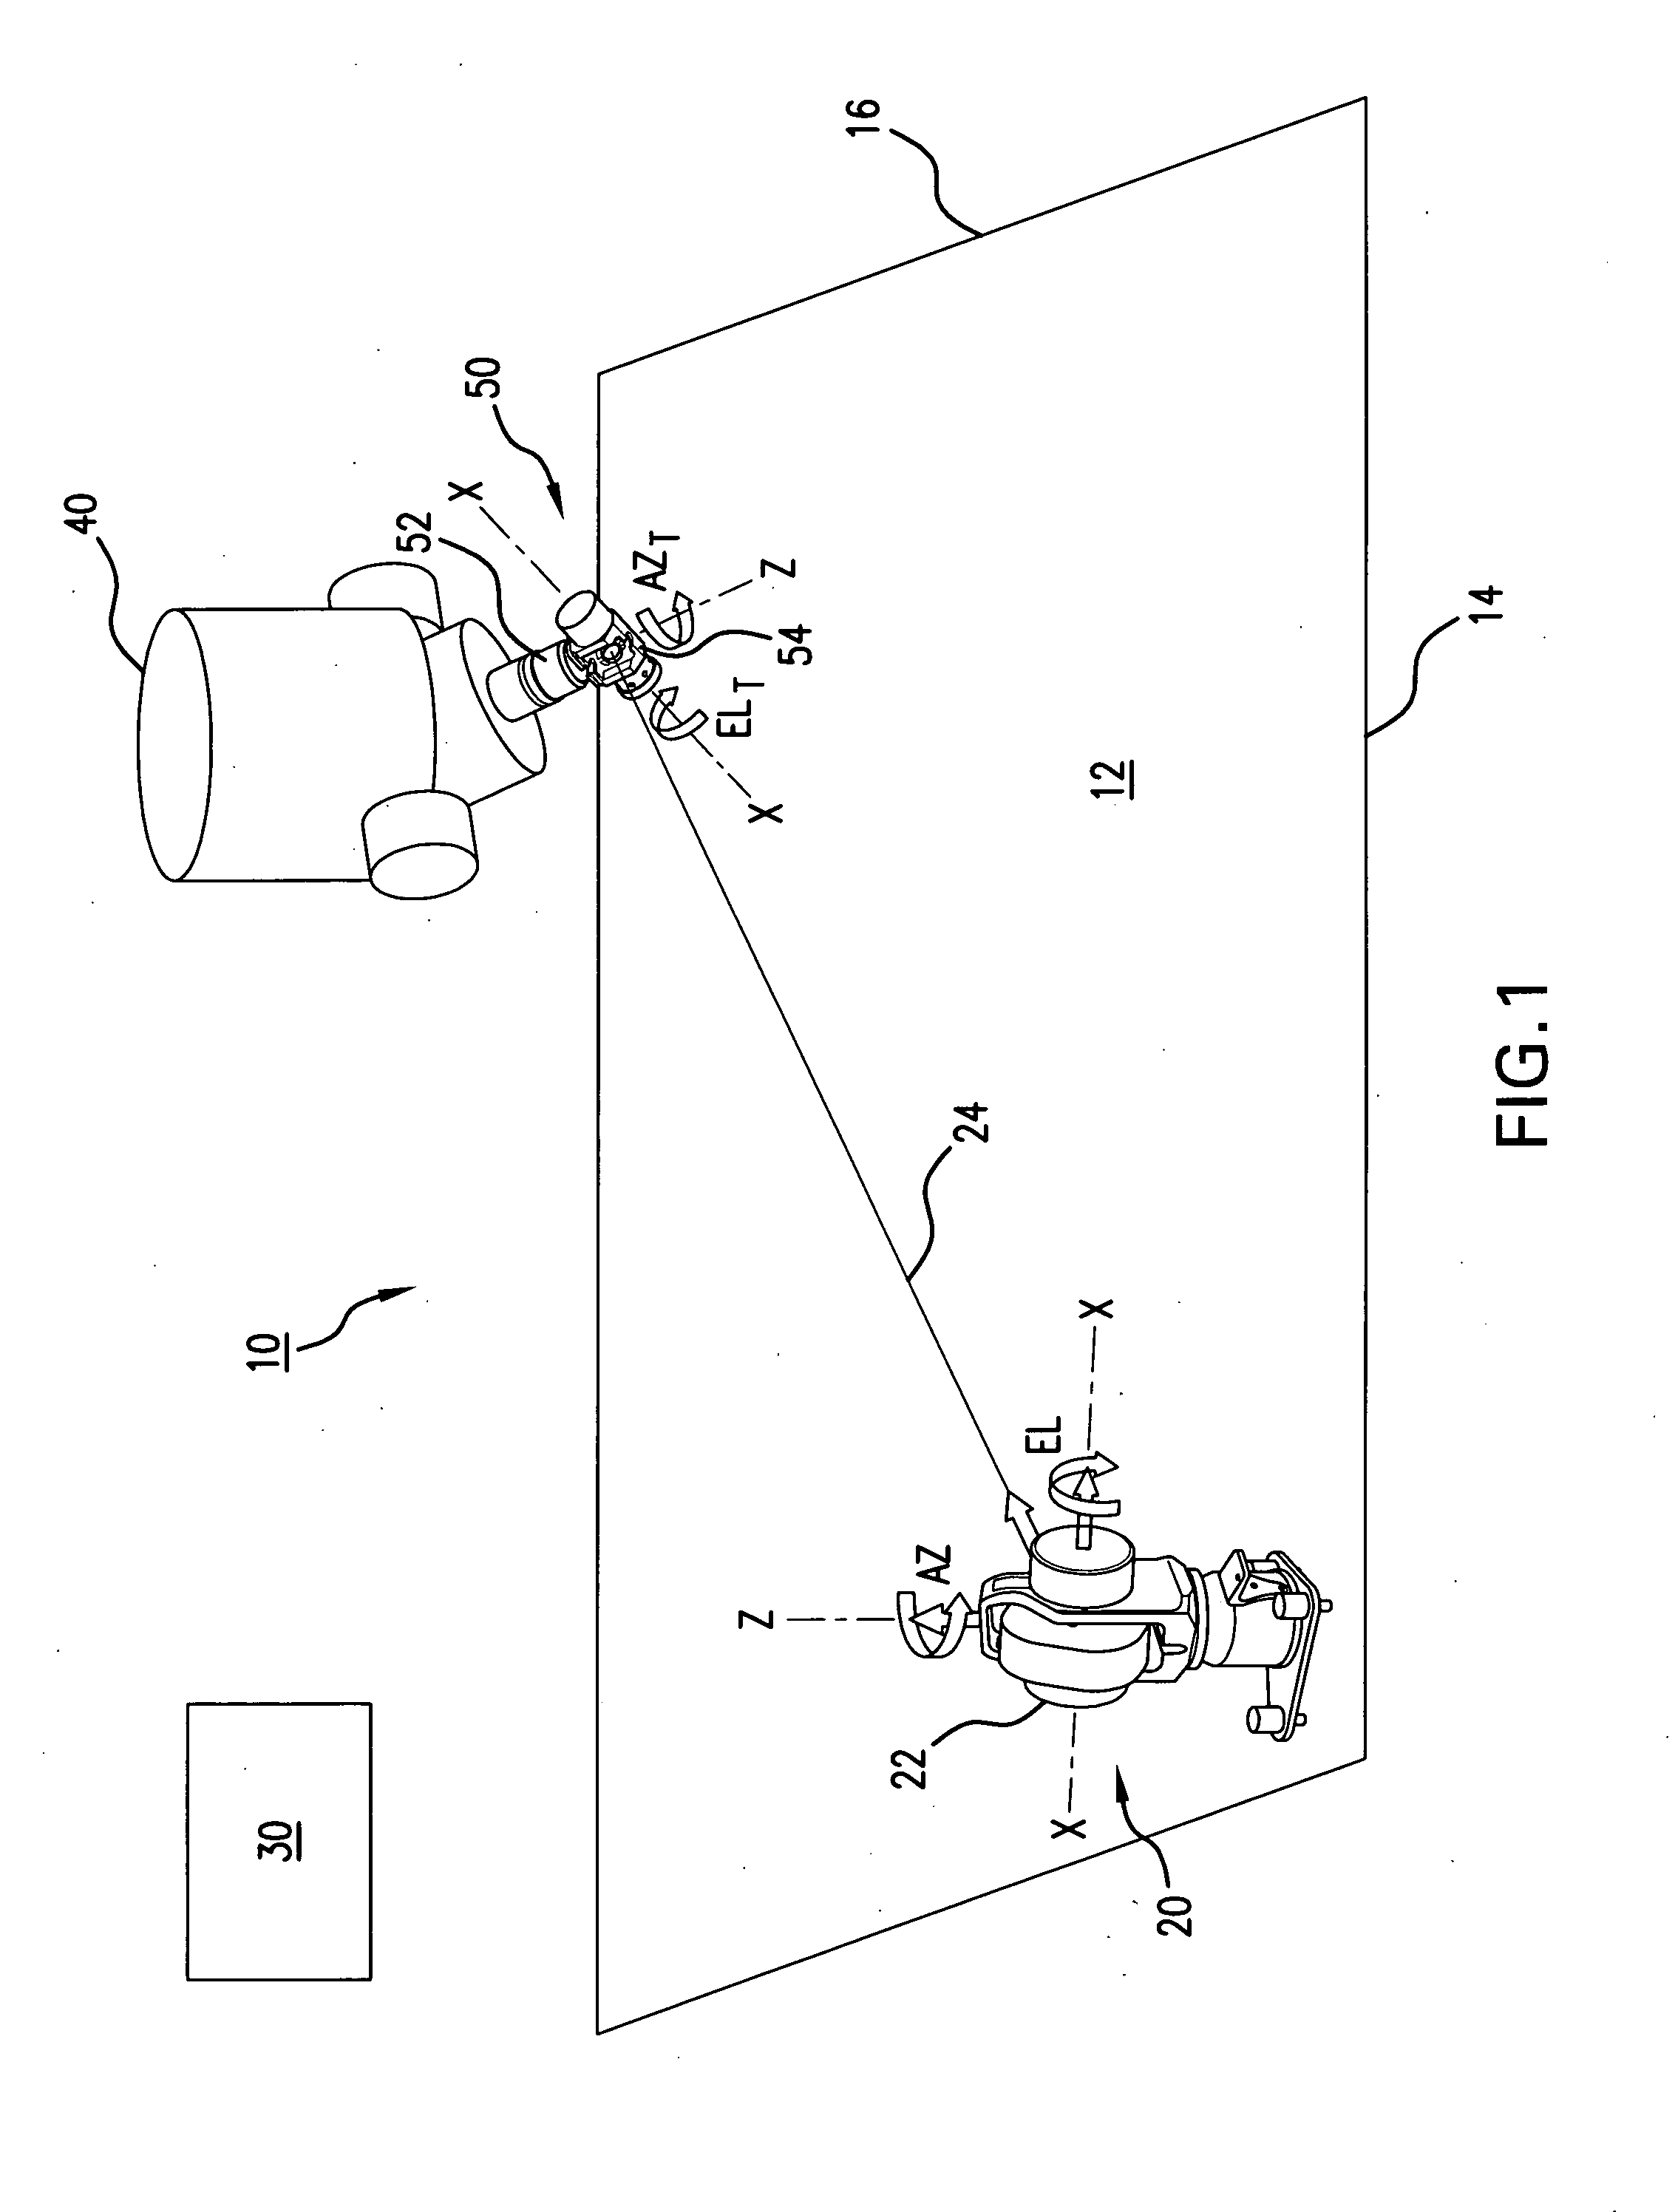 Volumetric error compensation system with laser tracker and active target